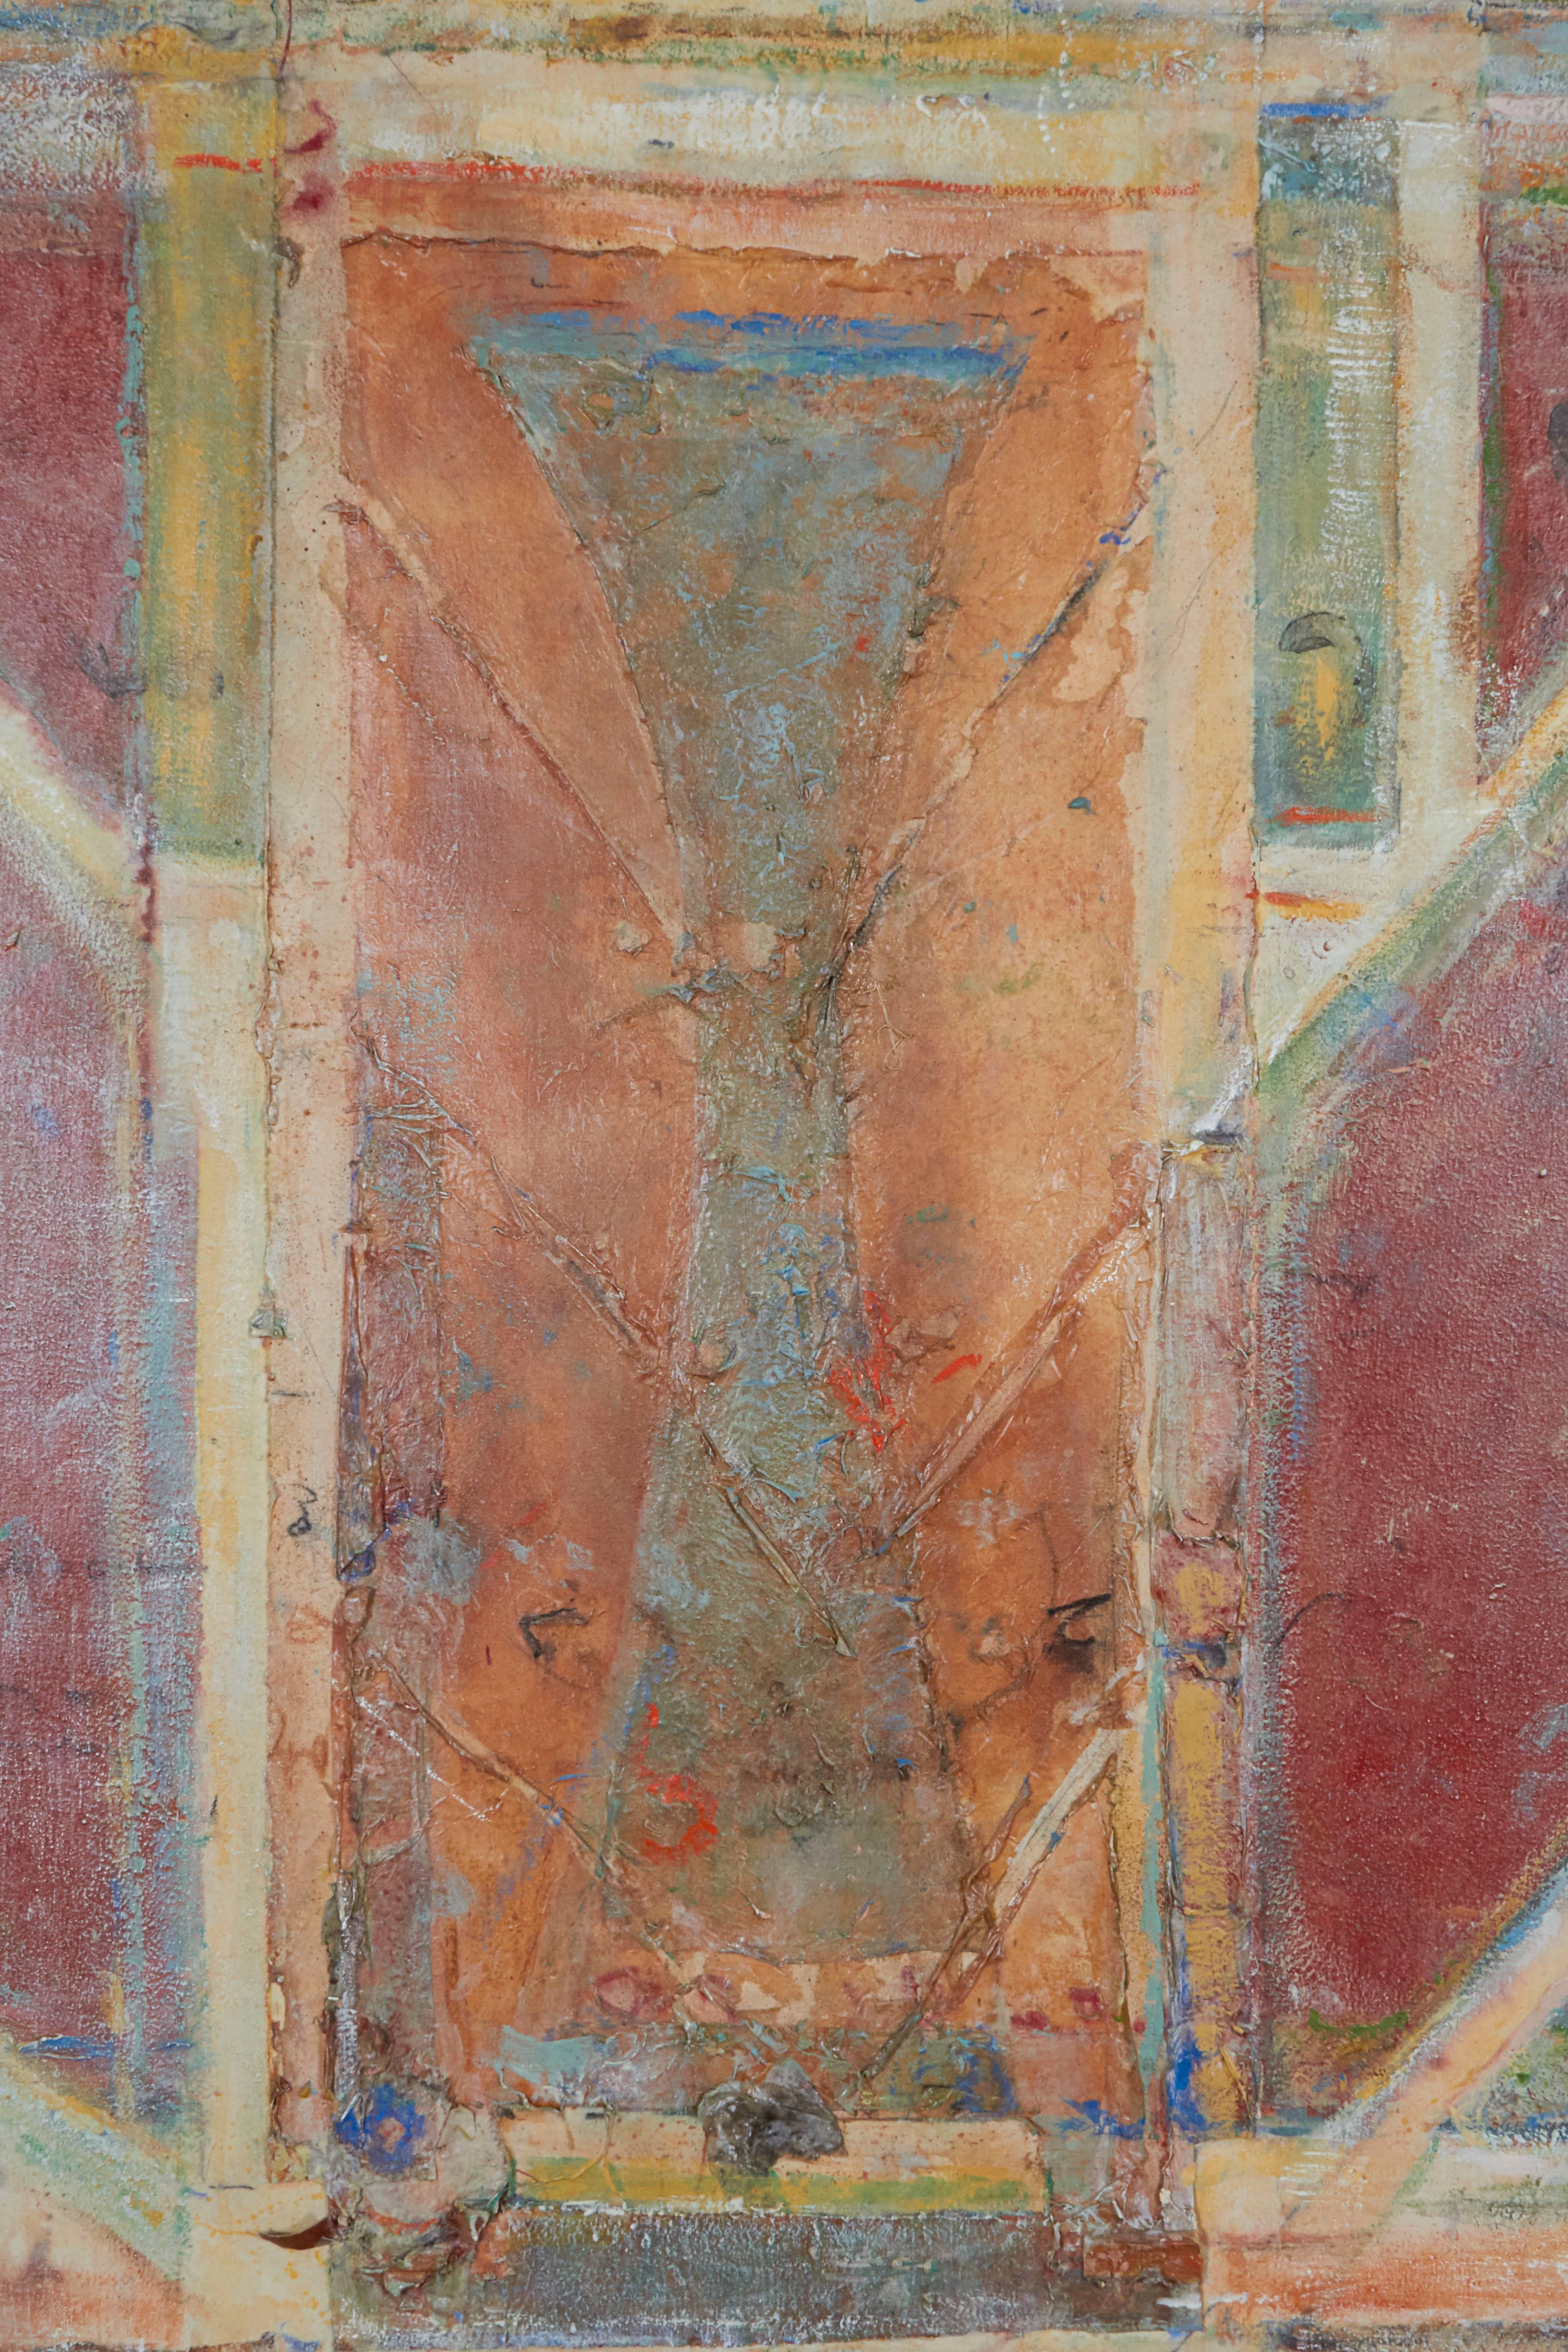 Oil and mixed-media on linen.
Inscribed on reverse: Lerner, / Sandra / @78 / TAO V / 72 x48.
Unframed.

Sandra Lerner lives and works in New York City and Sherman, Connecticut. She has participated in many one-person and group exhibitions